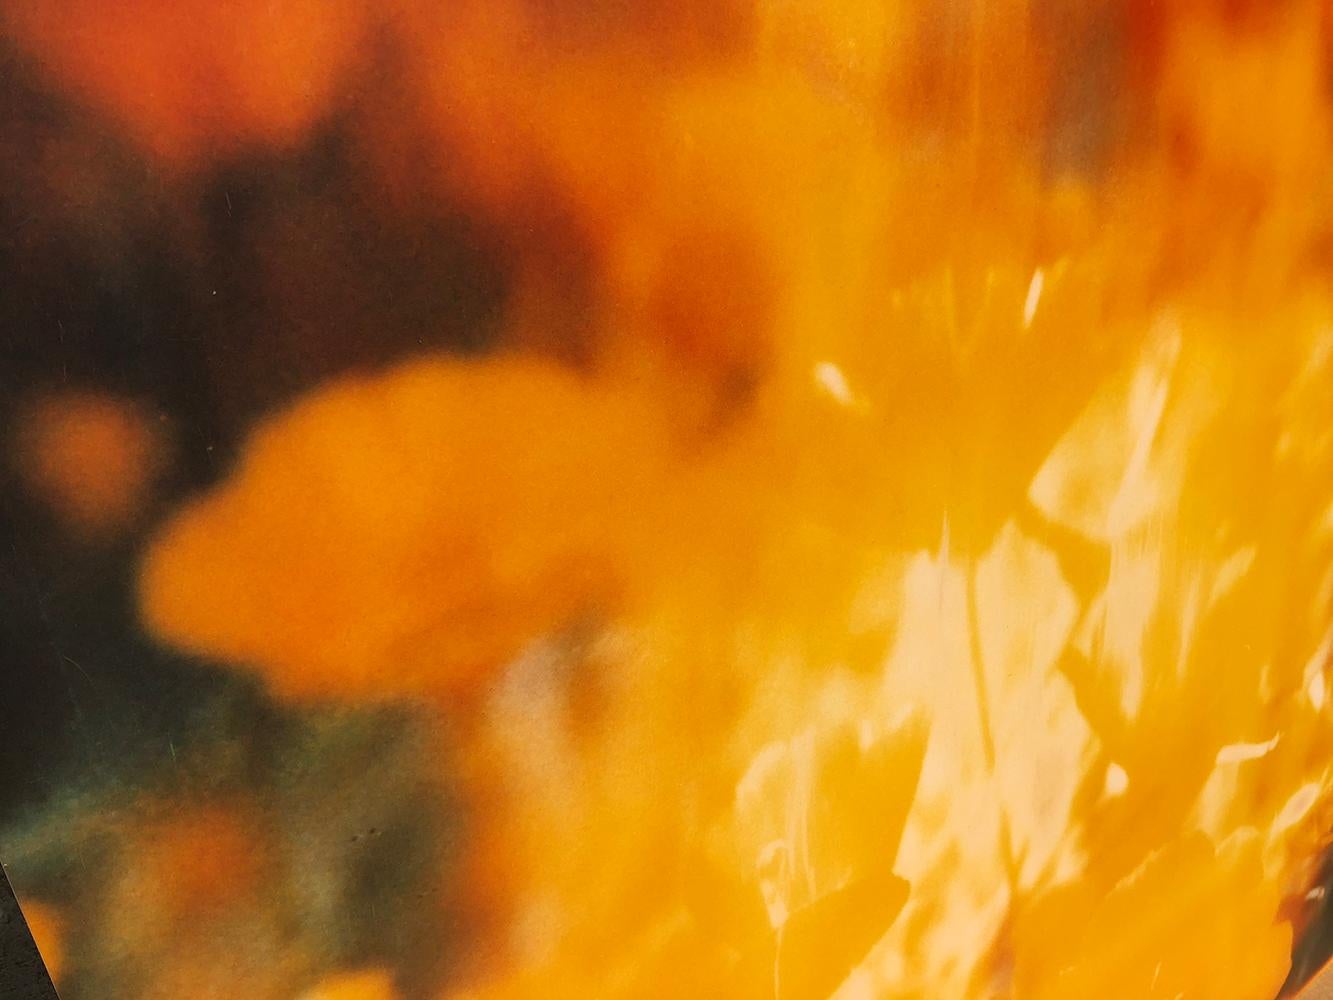 Yellow Flower (The Last Picture Show) 128x125cm, 2005, Edition 4/5, analog C-Print, hand-printed by the artist on Fuji Crystal Archive Paper, based on a Polaroid, signed on verso, Artist Inventory 672.04, mounted on Aluminum with matte